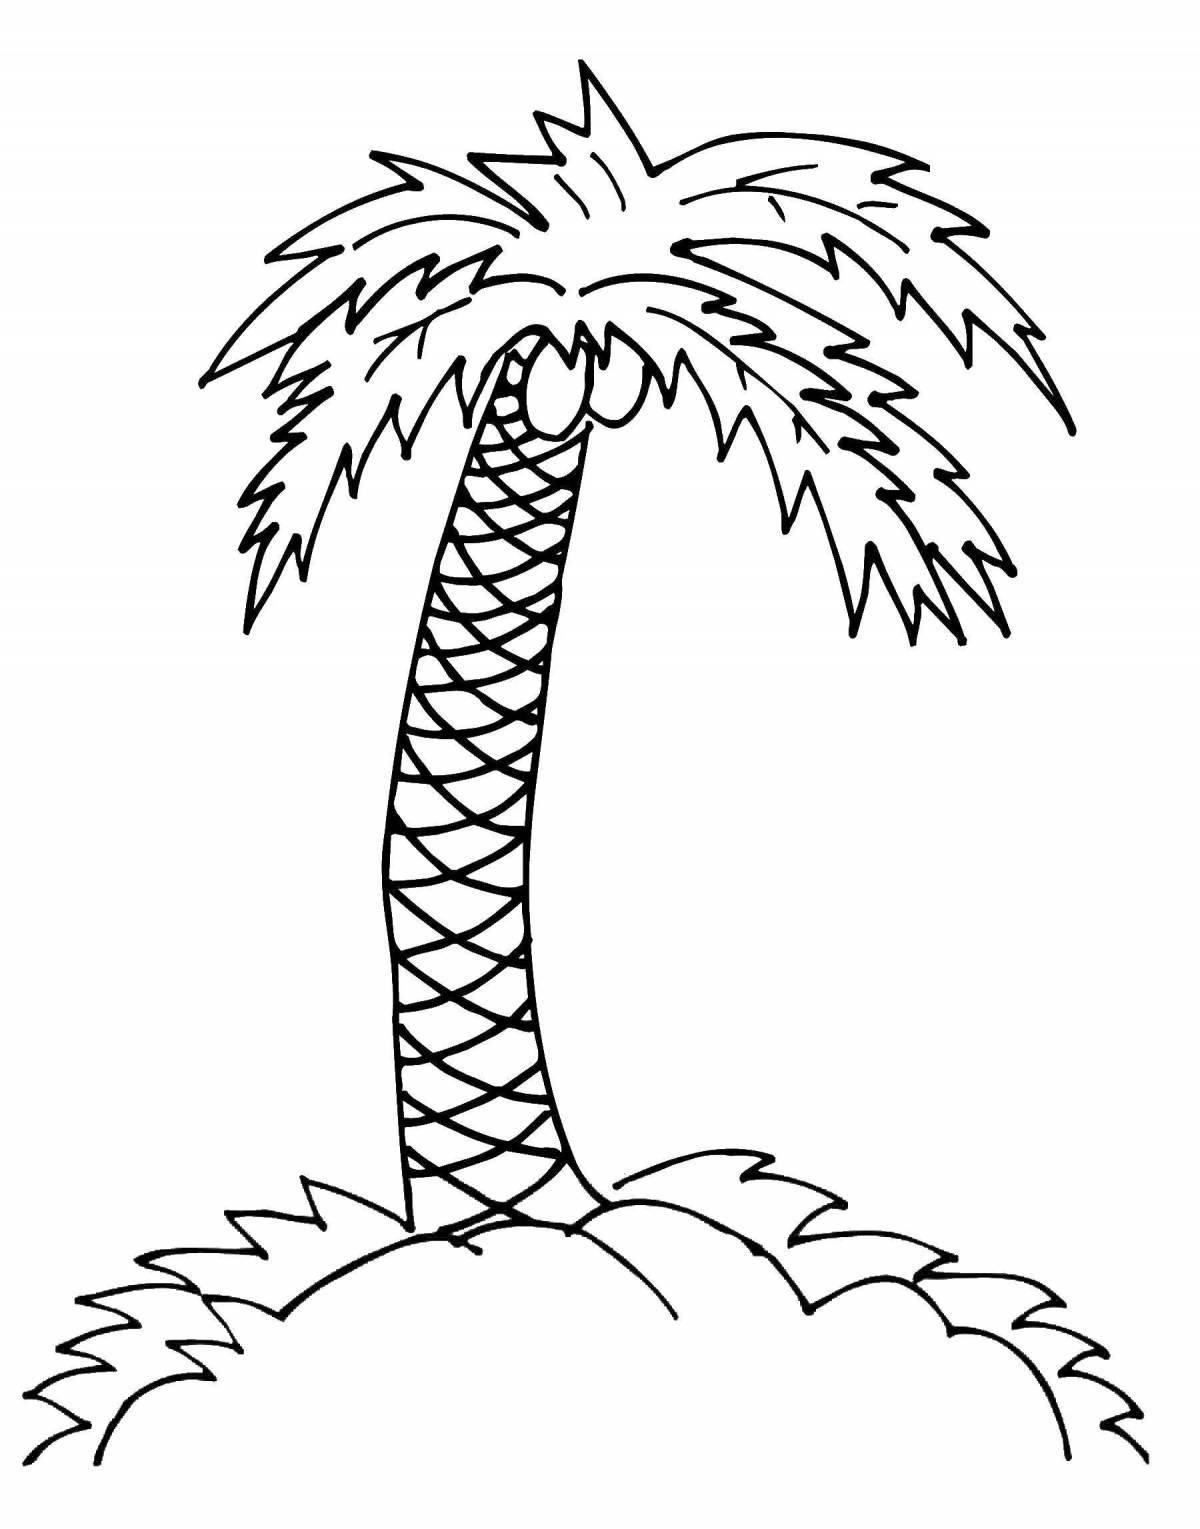 Weird palm tree coloring book for kids